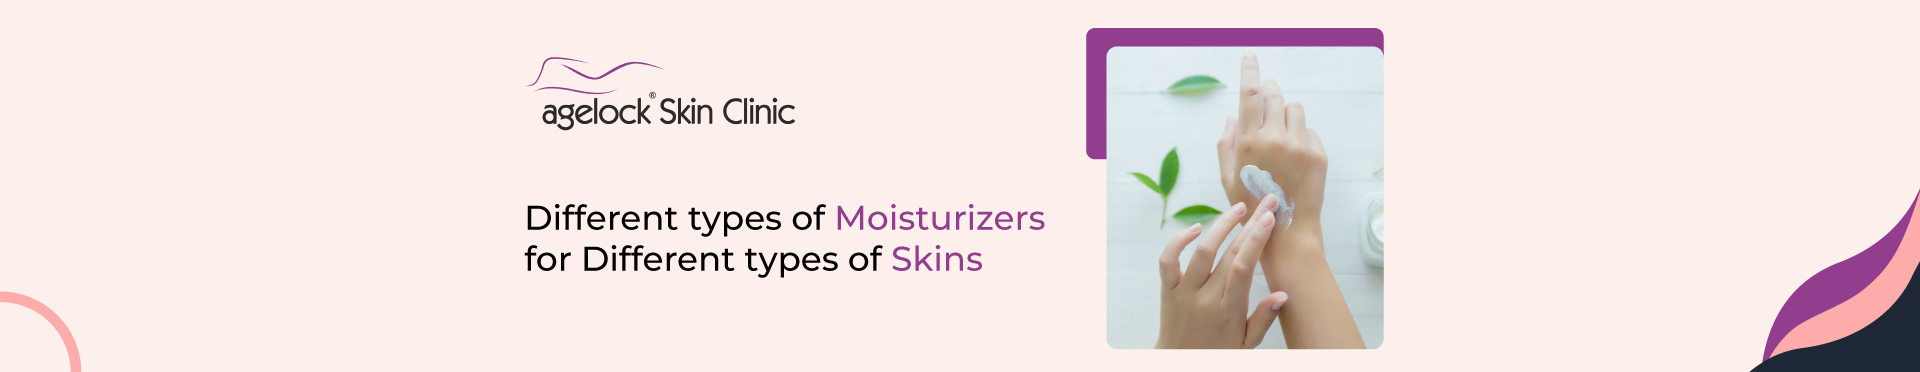 <strong>Different types of moisturizers for different types of skins</strong>